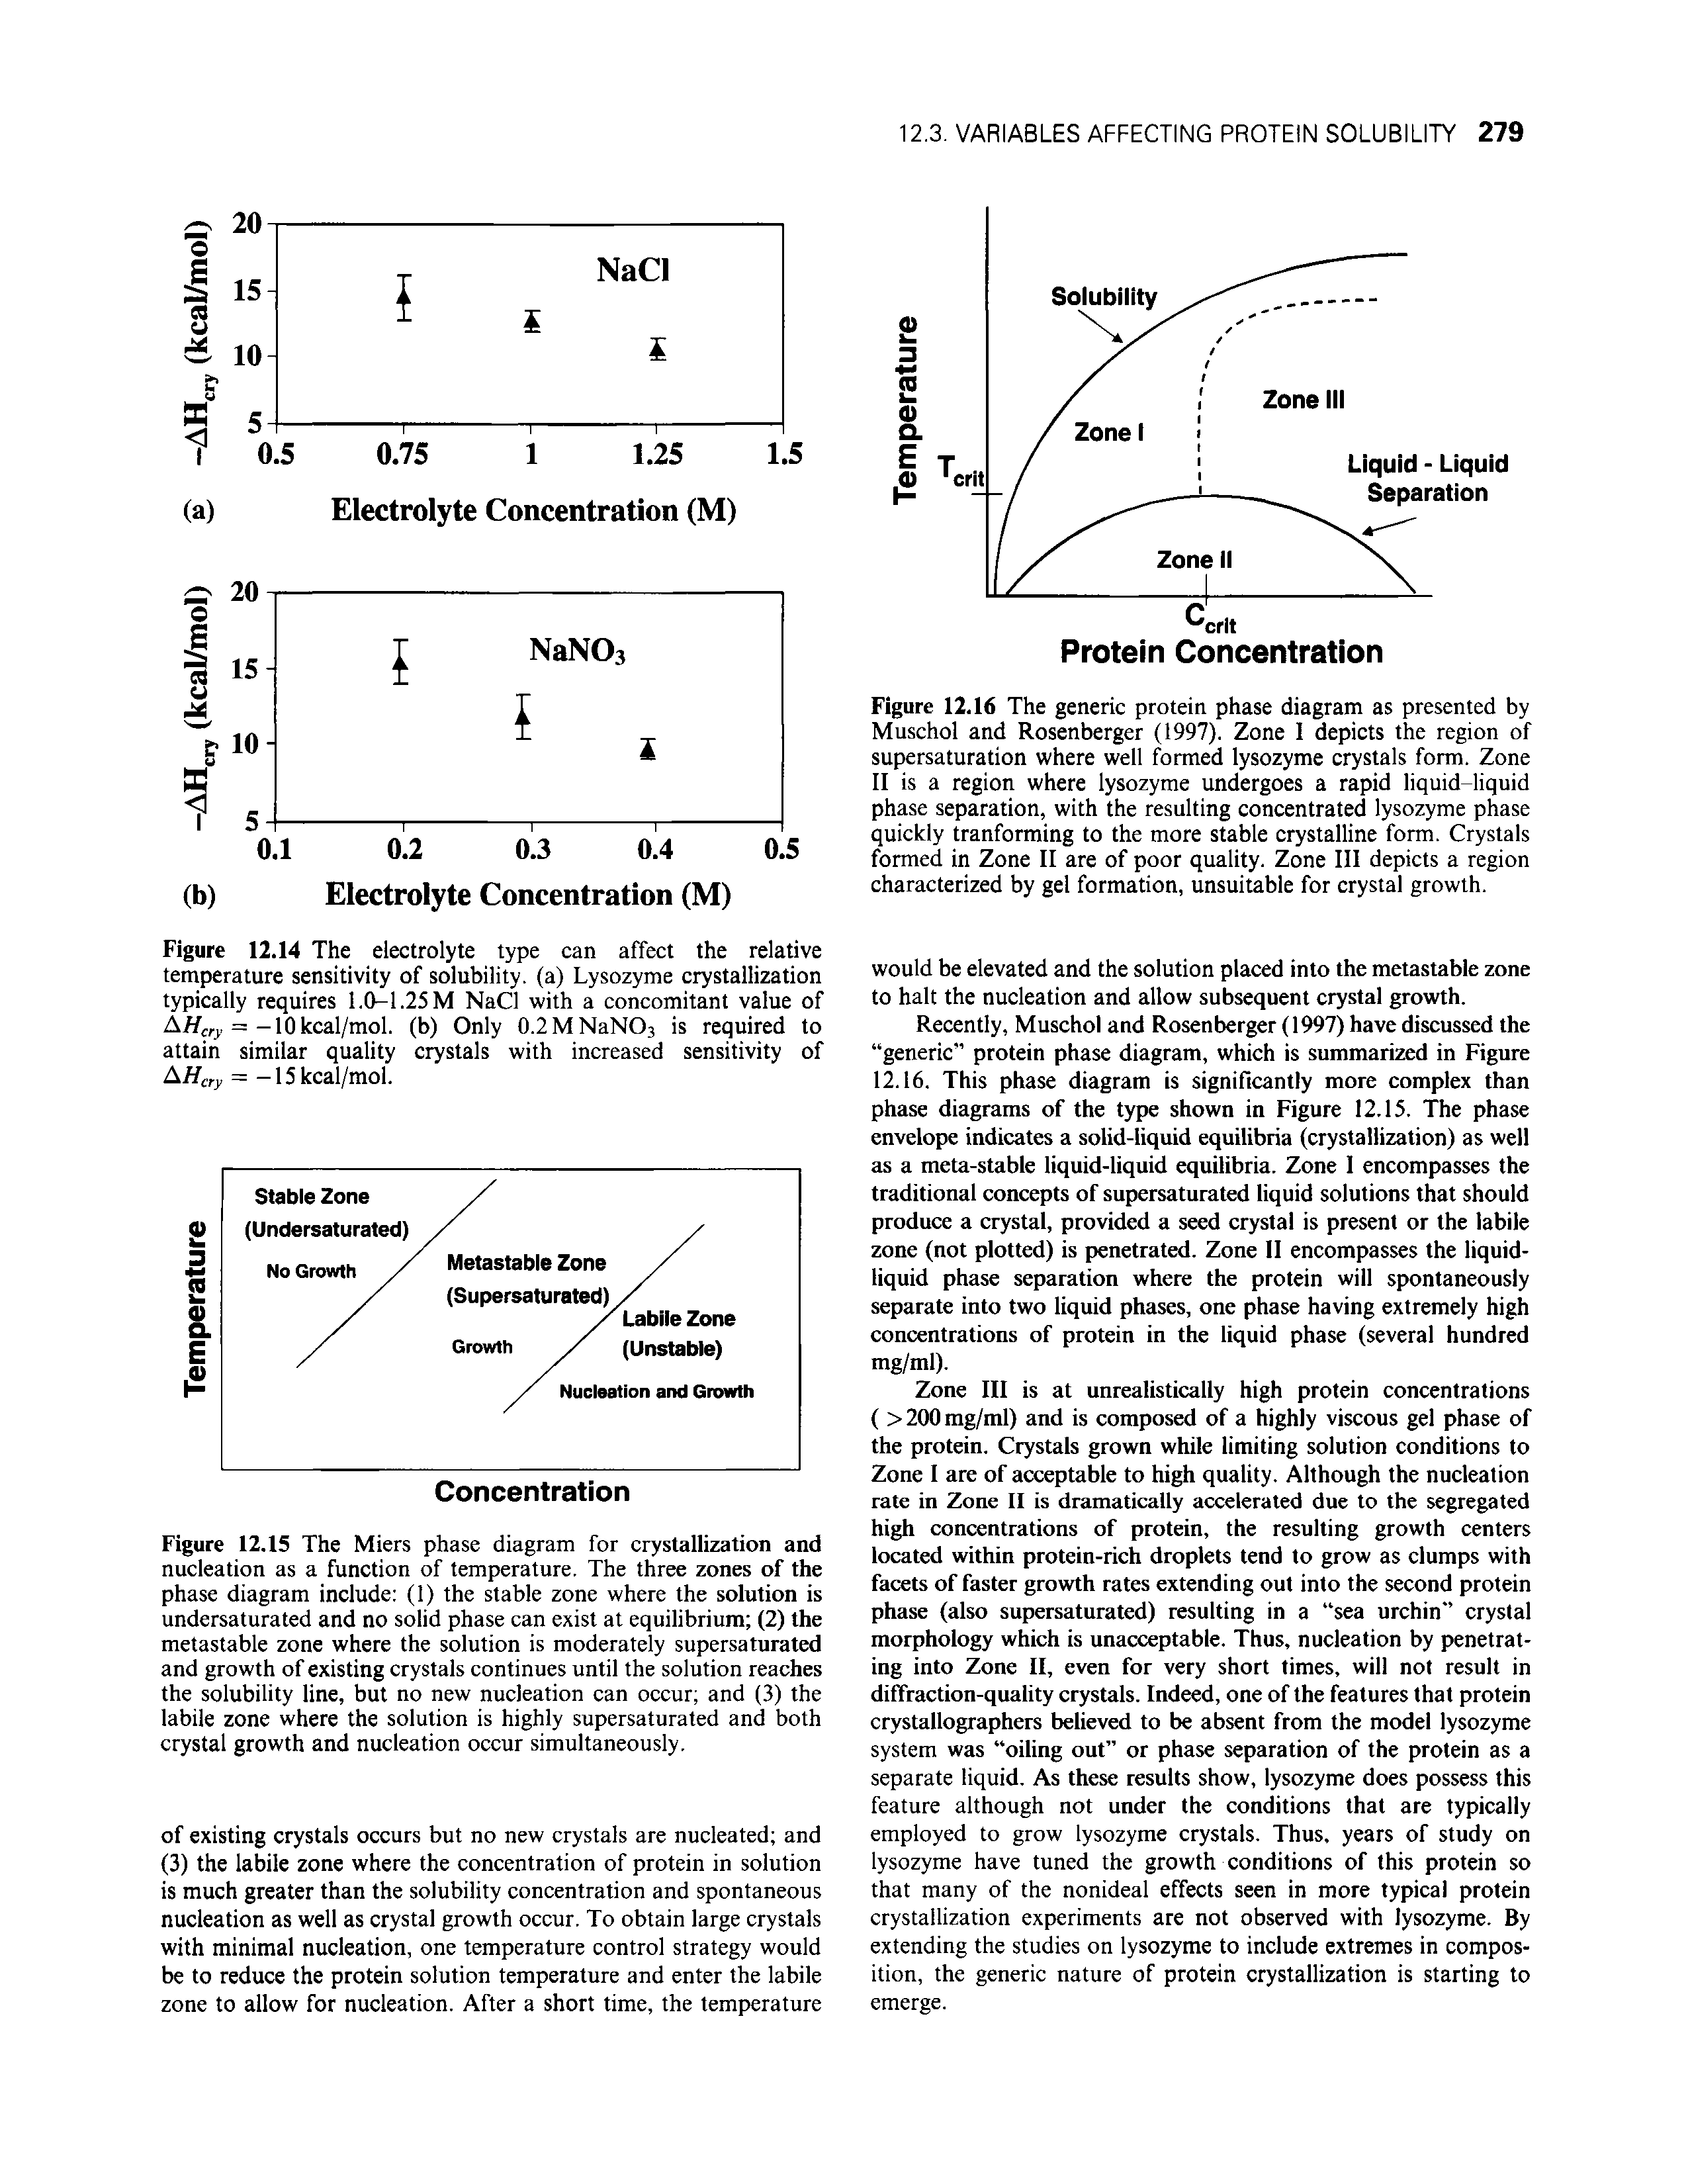 Figure 12.16 The generic protein phase diagram as presented by Muschol and Rosenberger (1997). Zone I depicts the region of supersaturation where well formed lysozyme crystals form. Zone II is a region where lysozyme undergoes a rapid liquid-liquid phase separation, with the resulting concentrated lysozyme phase quickly tranforming to the more stable crystalline form. Crystals formed in Zone II are of poor quality. Zone III depicts a region characterized by gel formation, unsuitable for crystal growth.